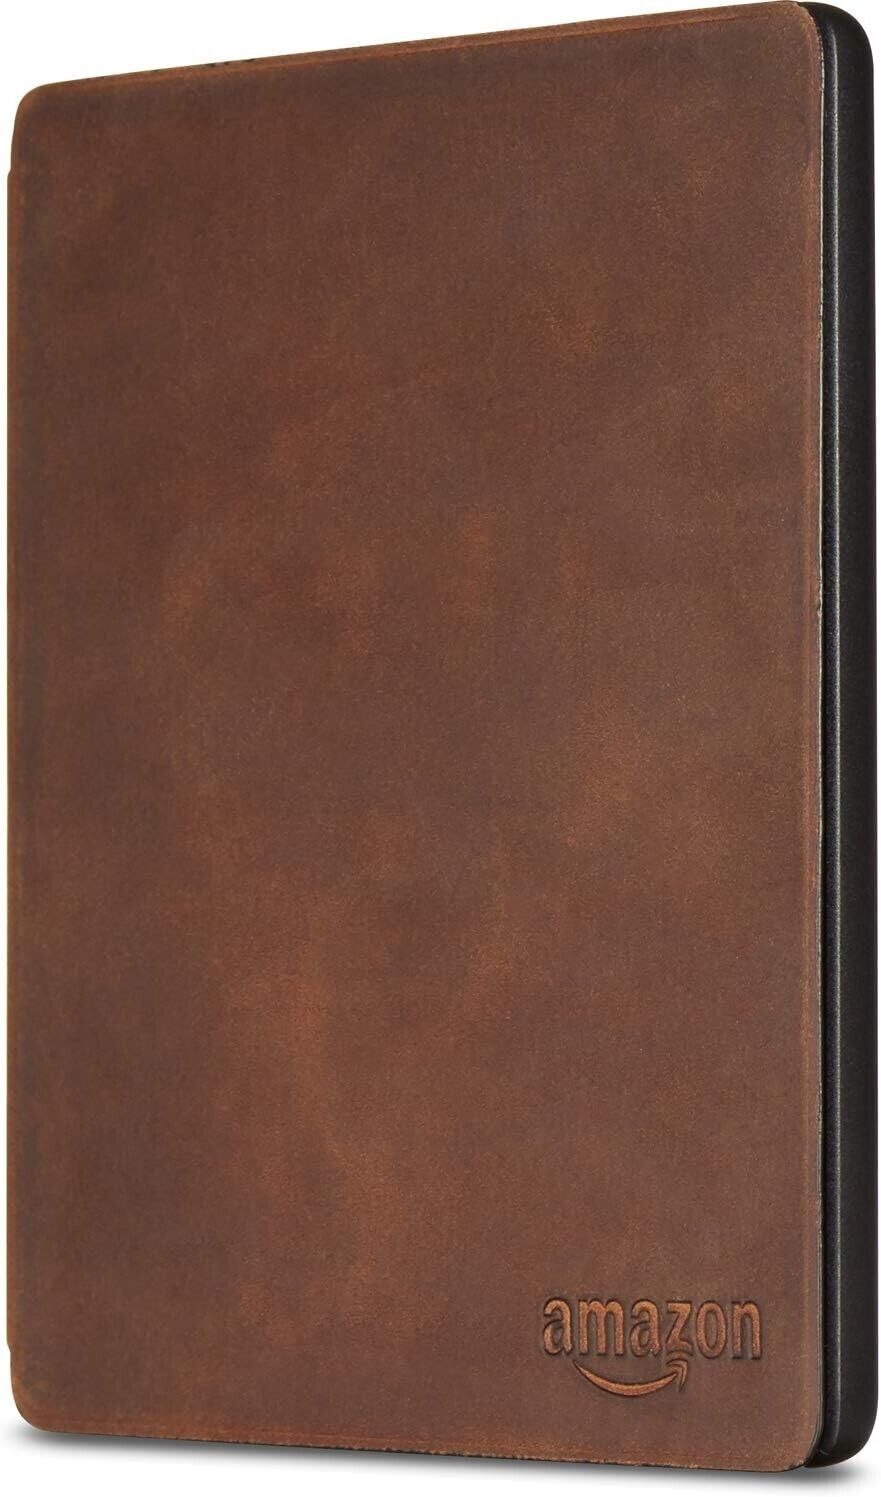 Amazon Premium Leather Cover Case for Kindle Oasis 9th 10th brown Japan New F/S